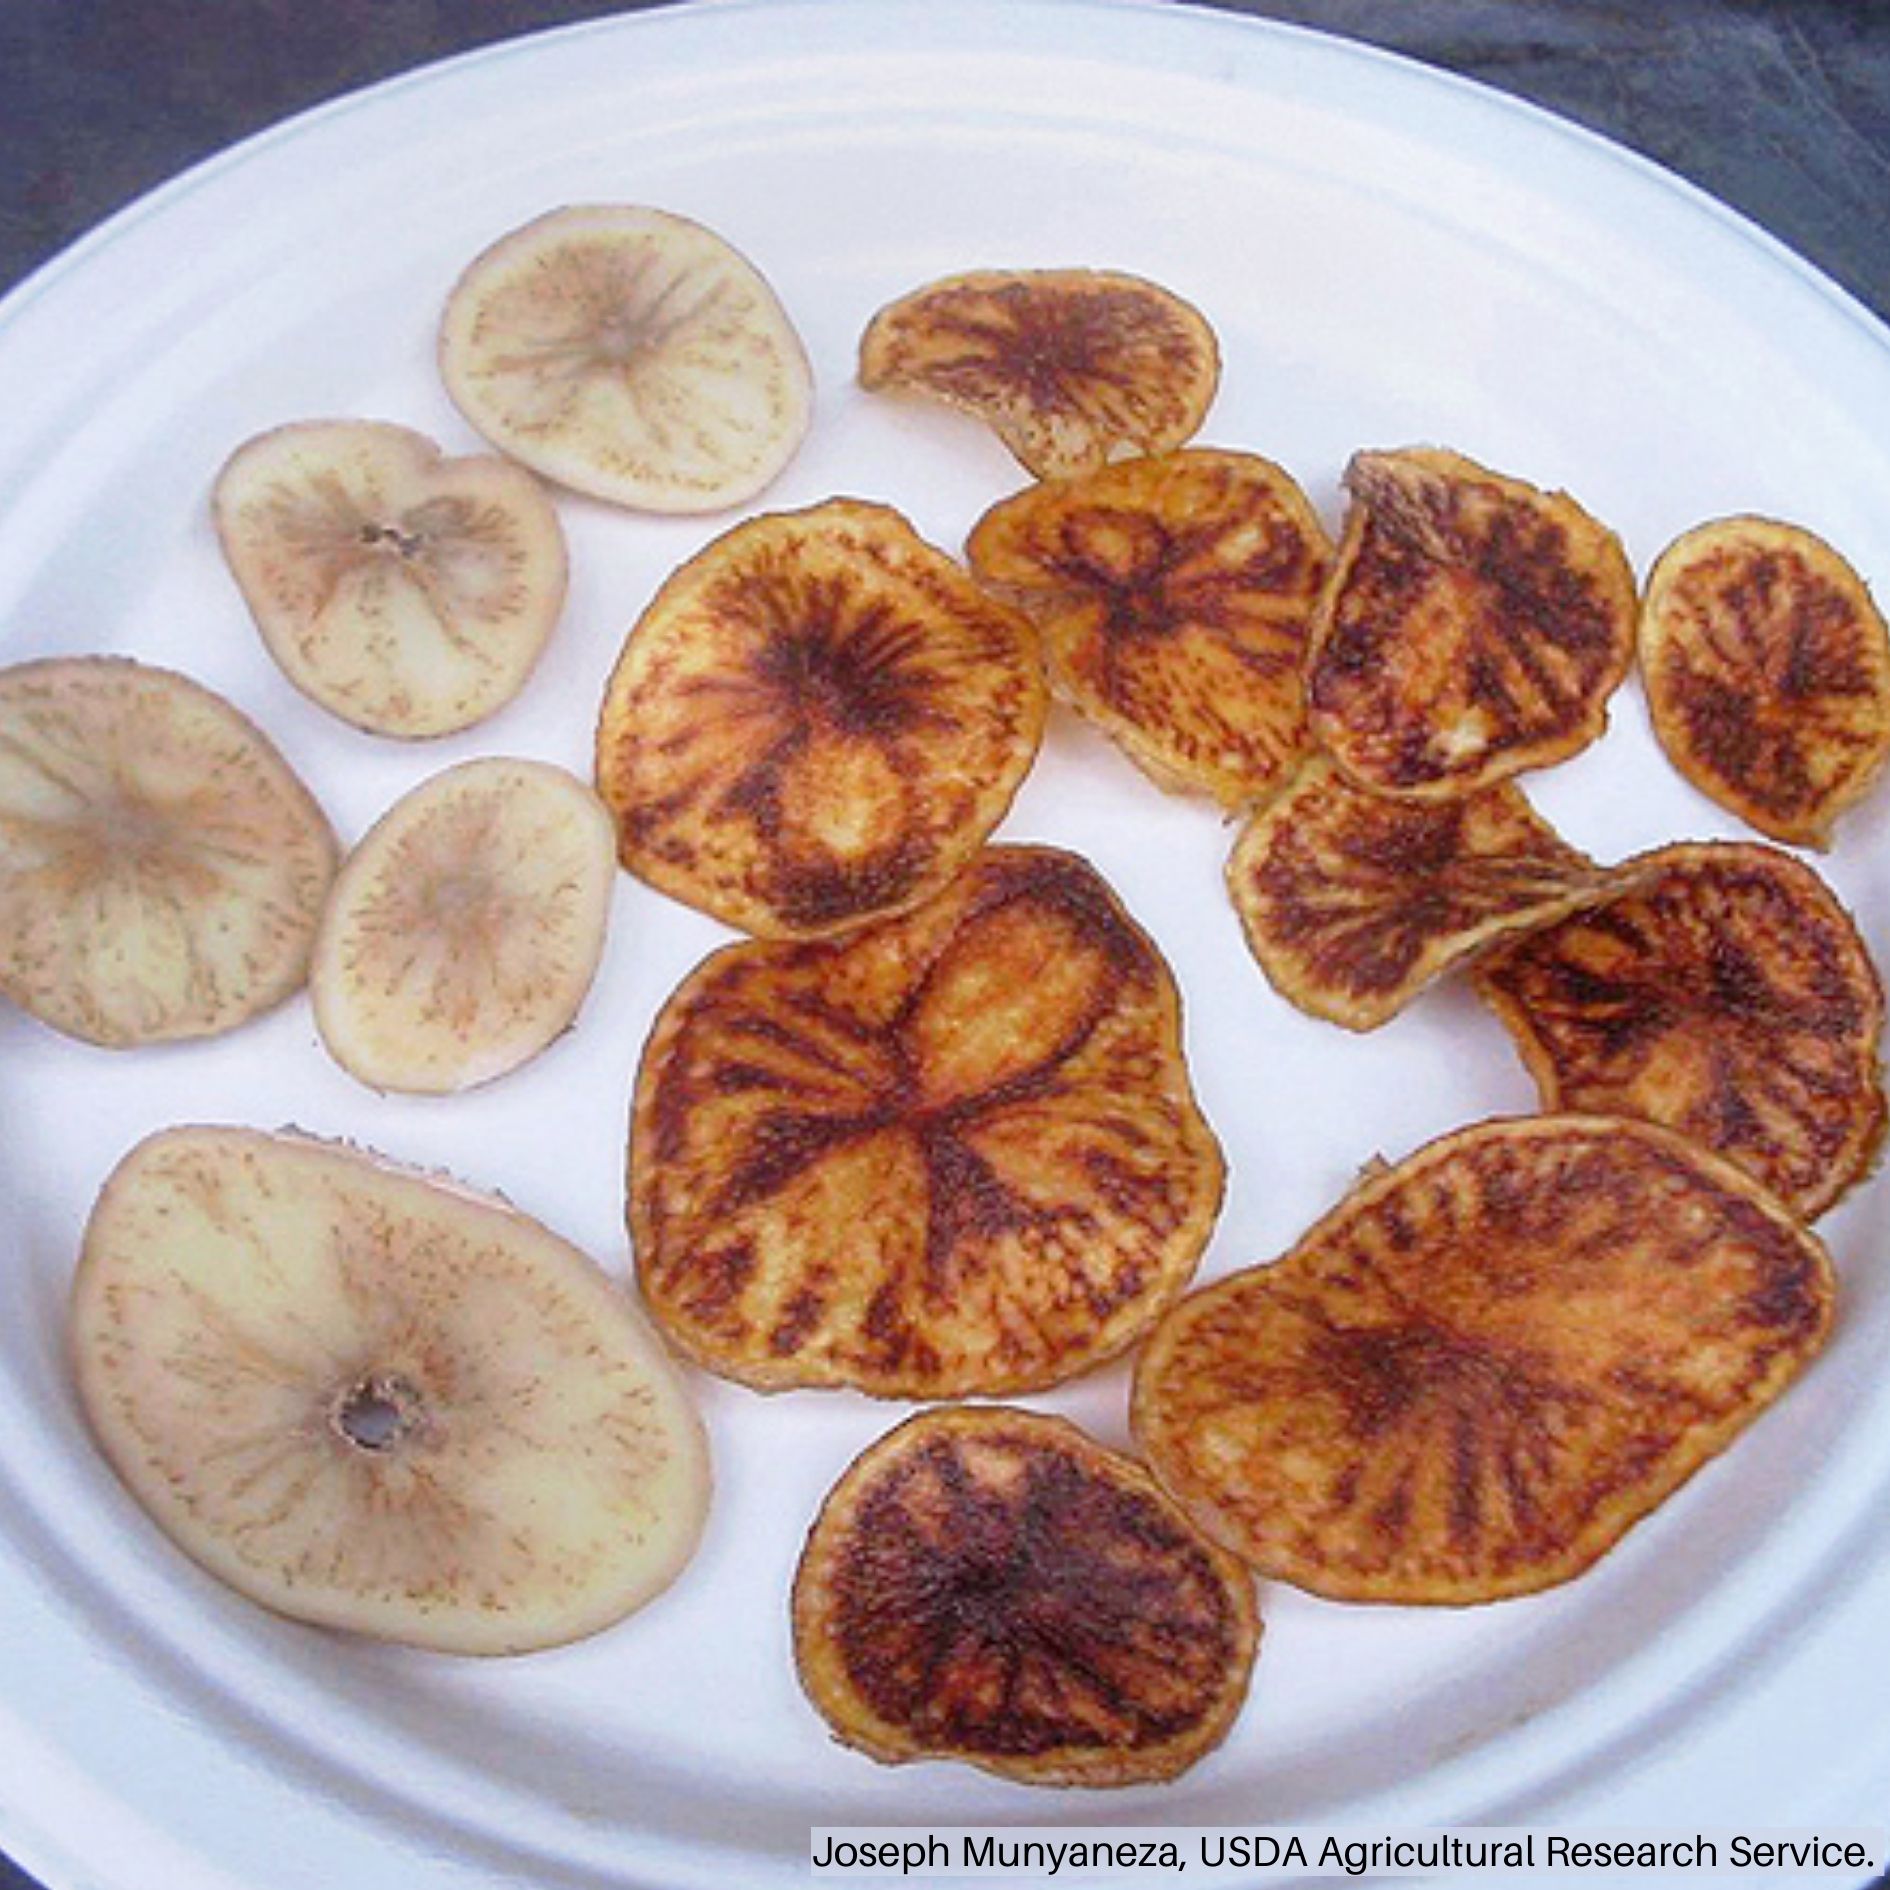 Potato Slices with Brown Discoloration